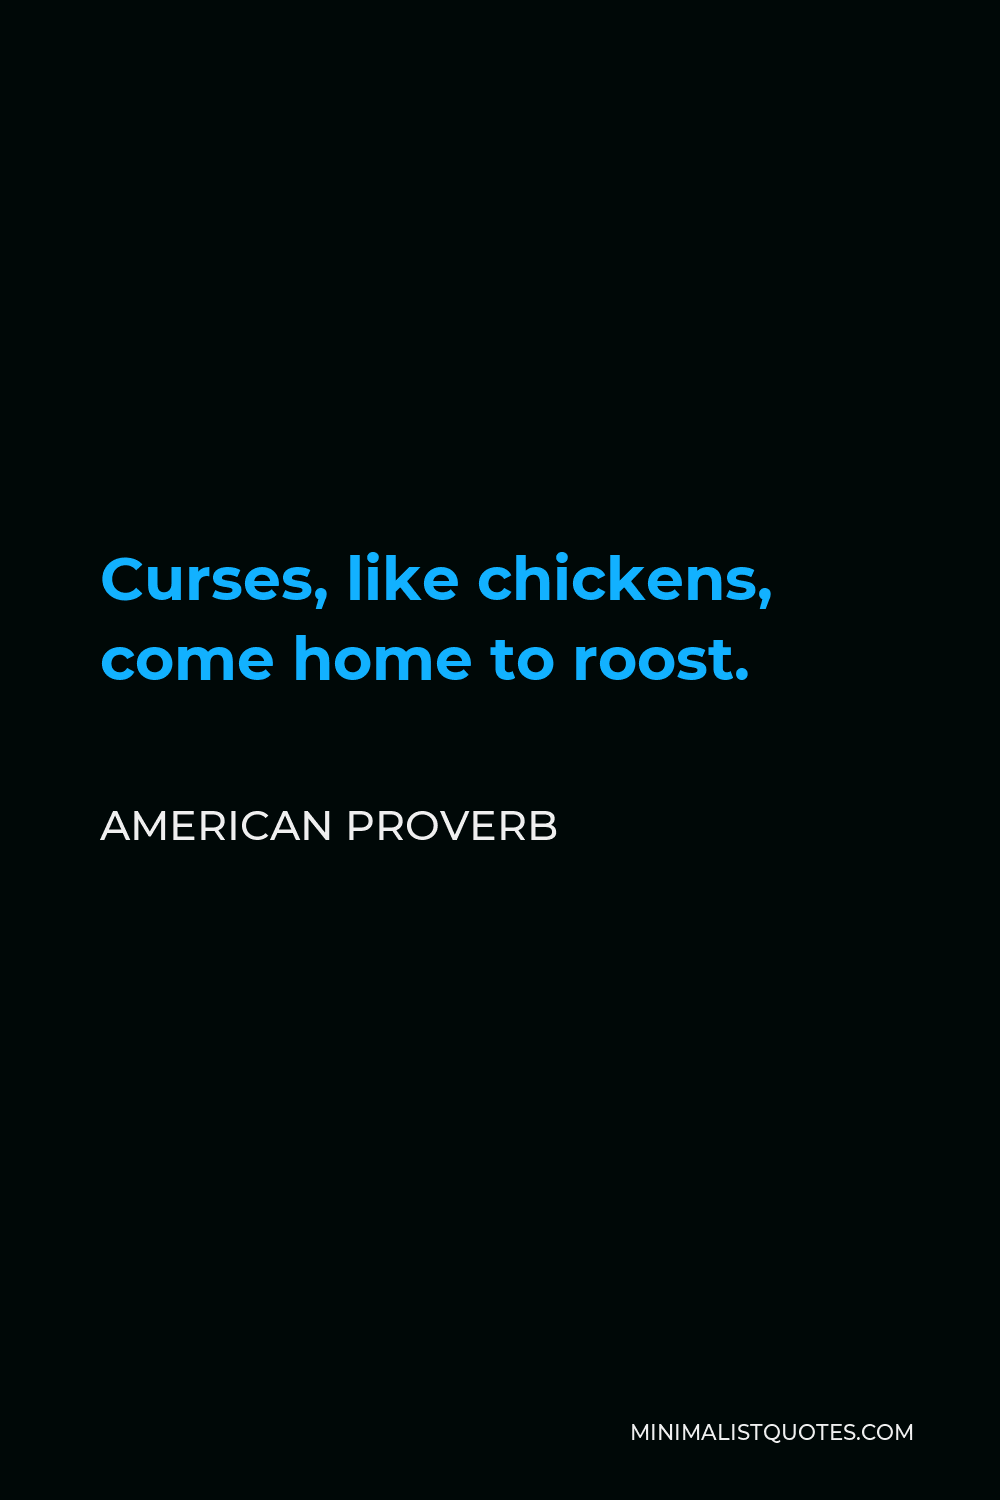 American Proverb Quote - Curses, like chickens, come home to roost.